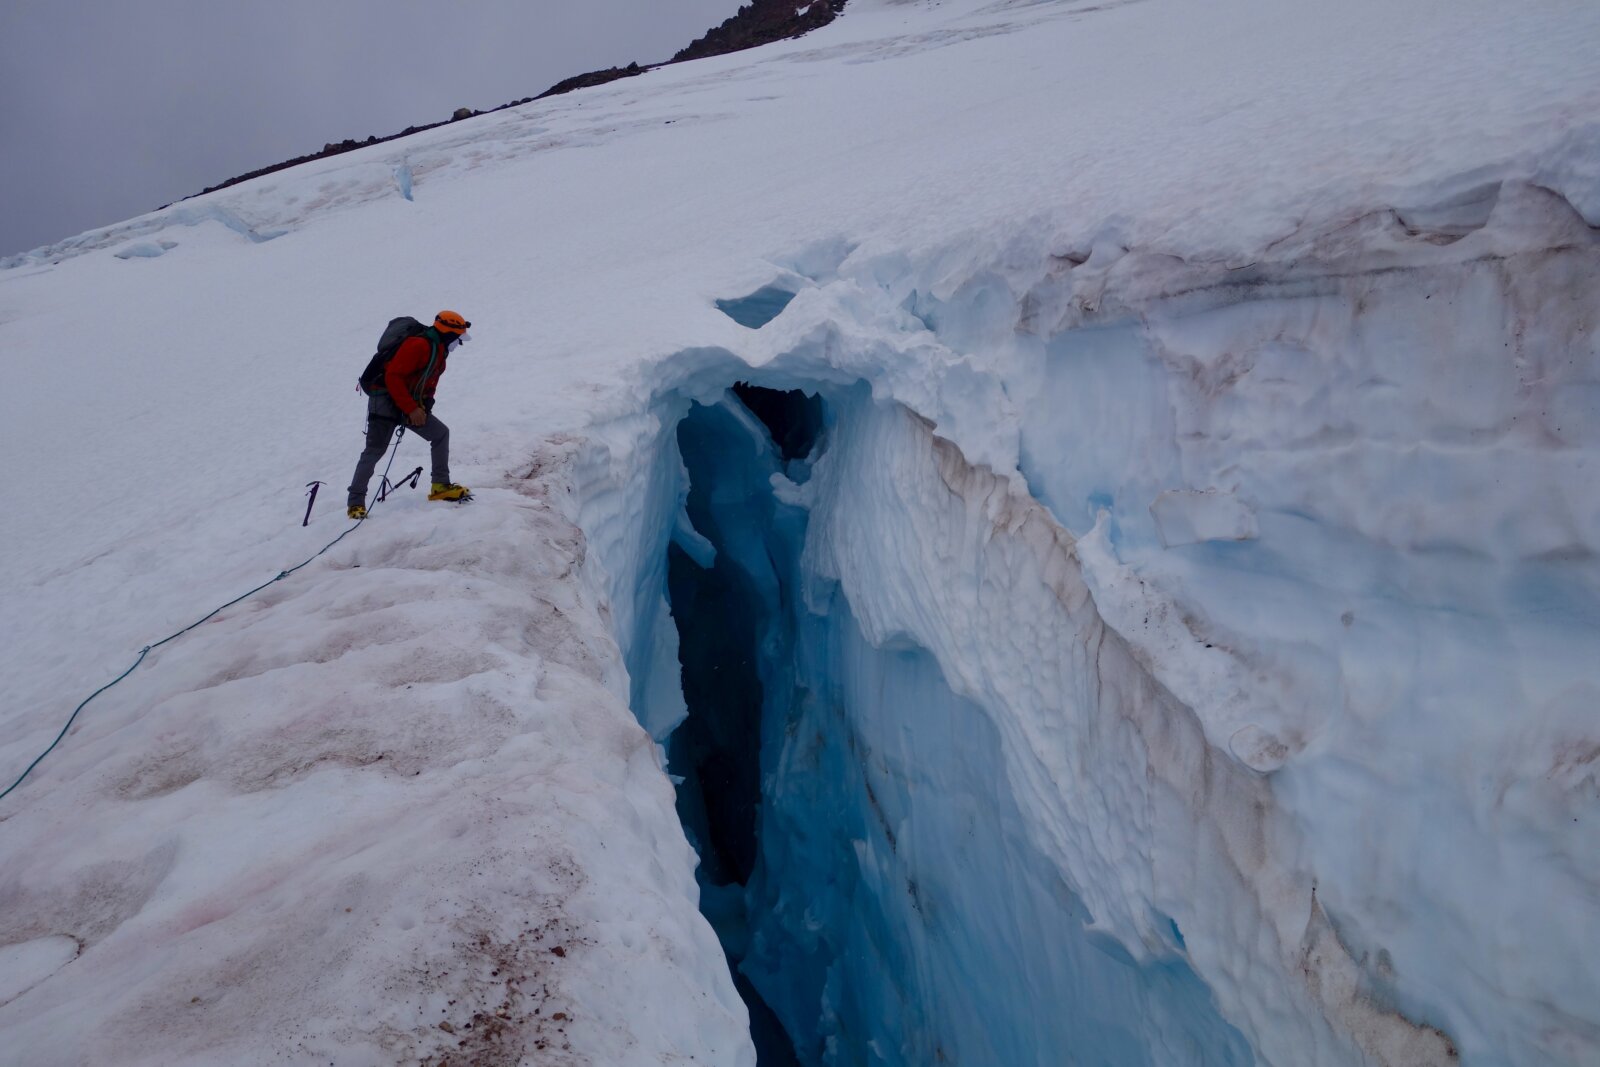 Mountaineer peering into a crevasse on Mount Shasta during an Intro To Mountaineering course with Alpenglow Expeditions